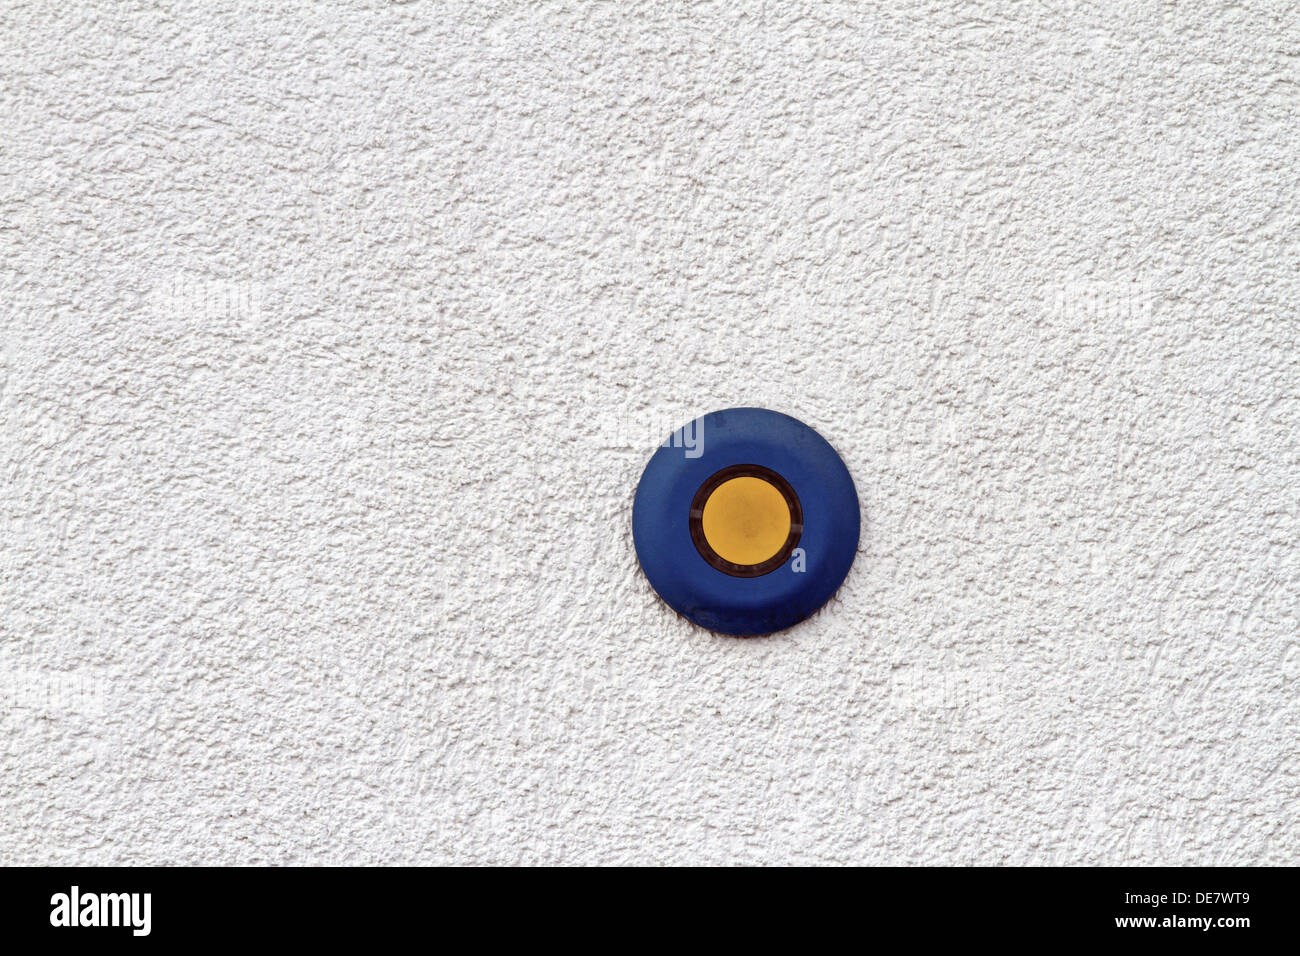 abstract view of blue and yellow button on mortar finished wall Stock Photo